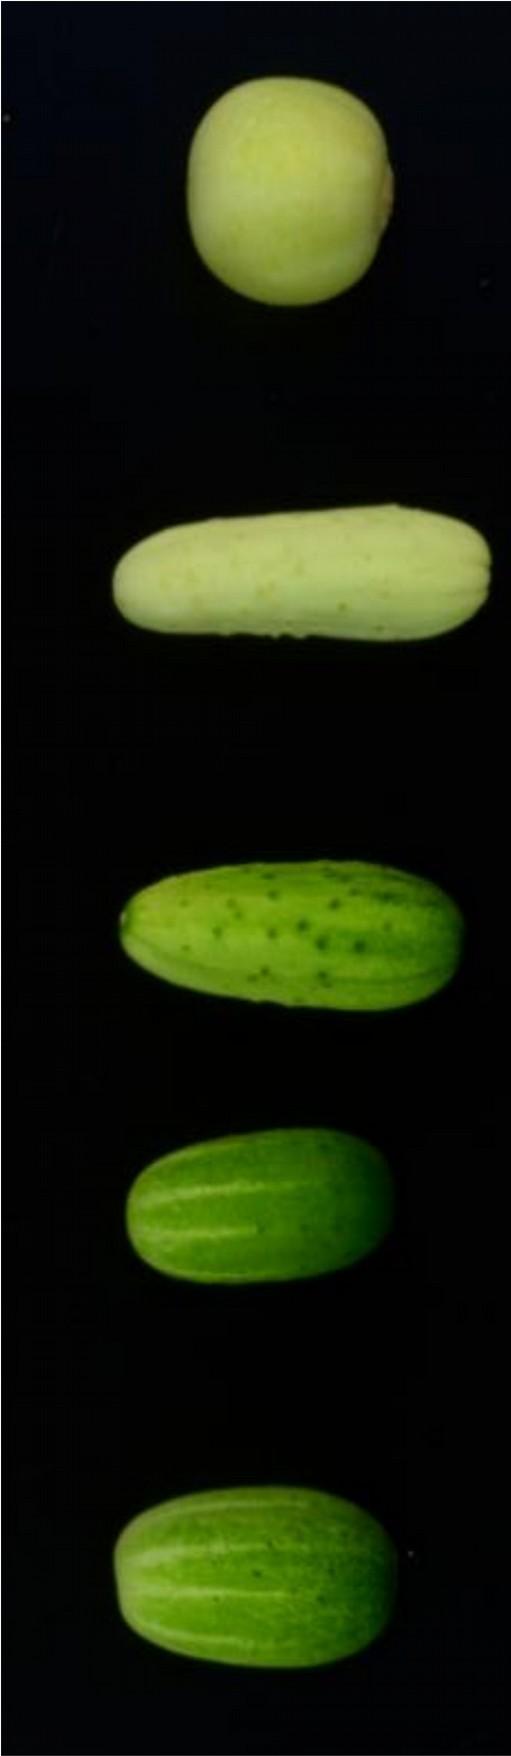 Image analysis in plant breeding Marker assisted breeding Markers: Molecular